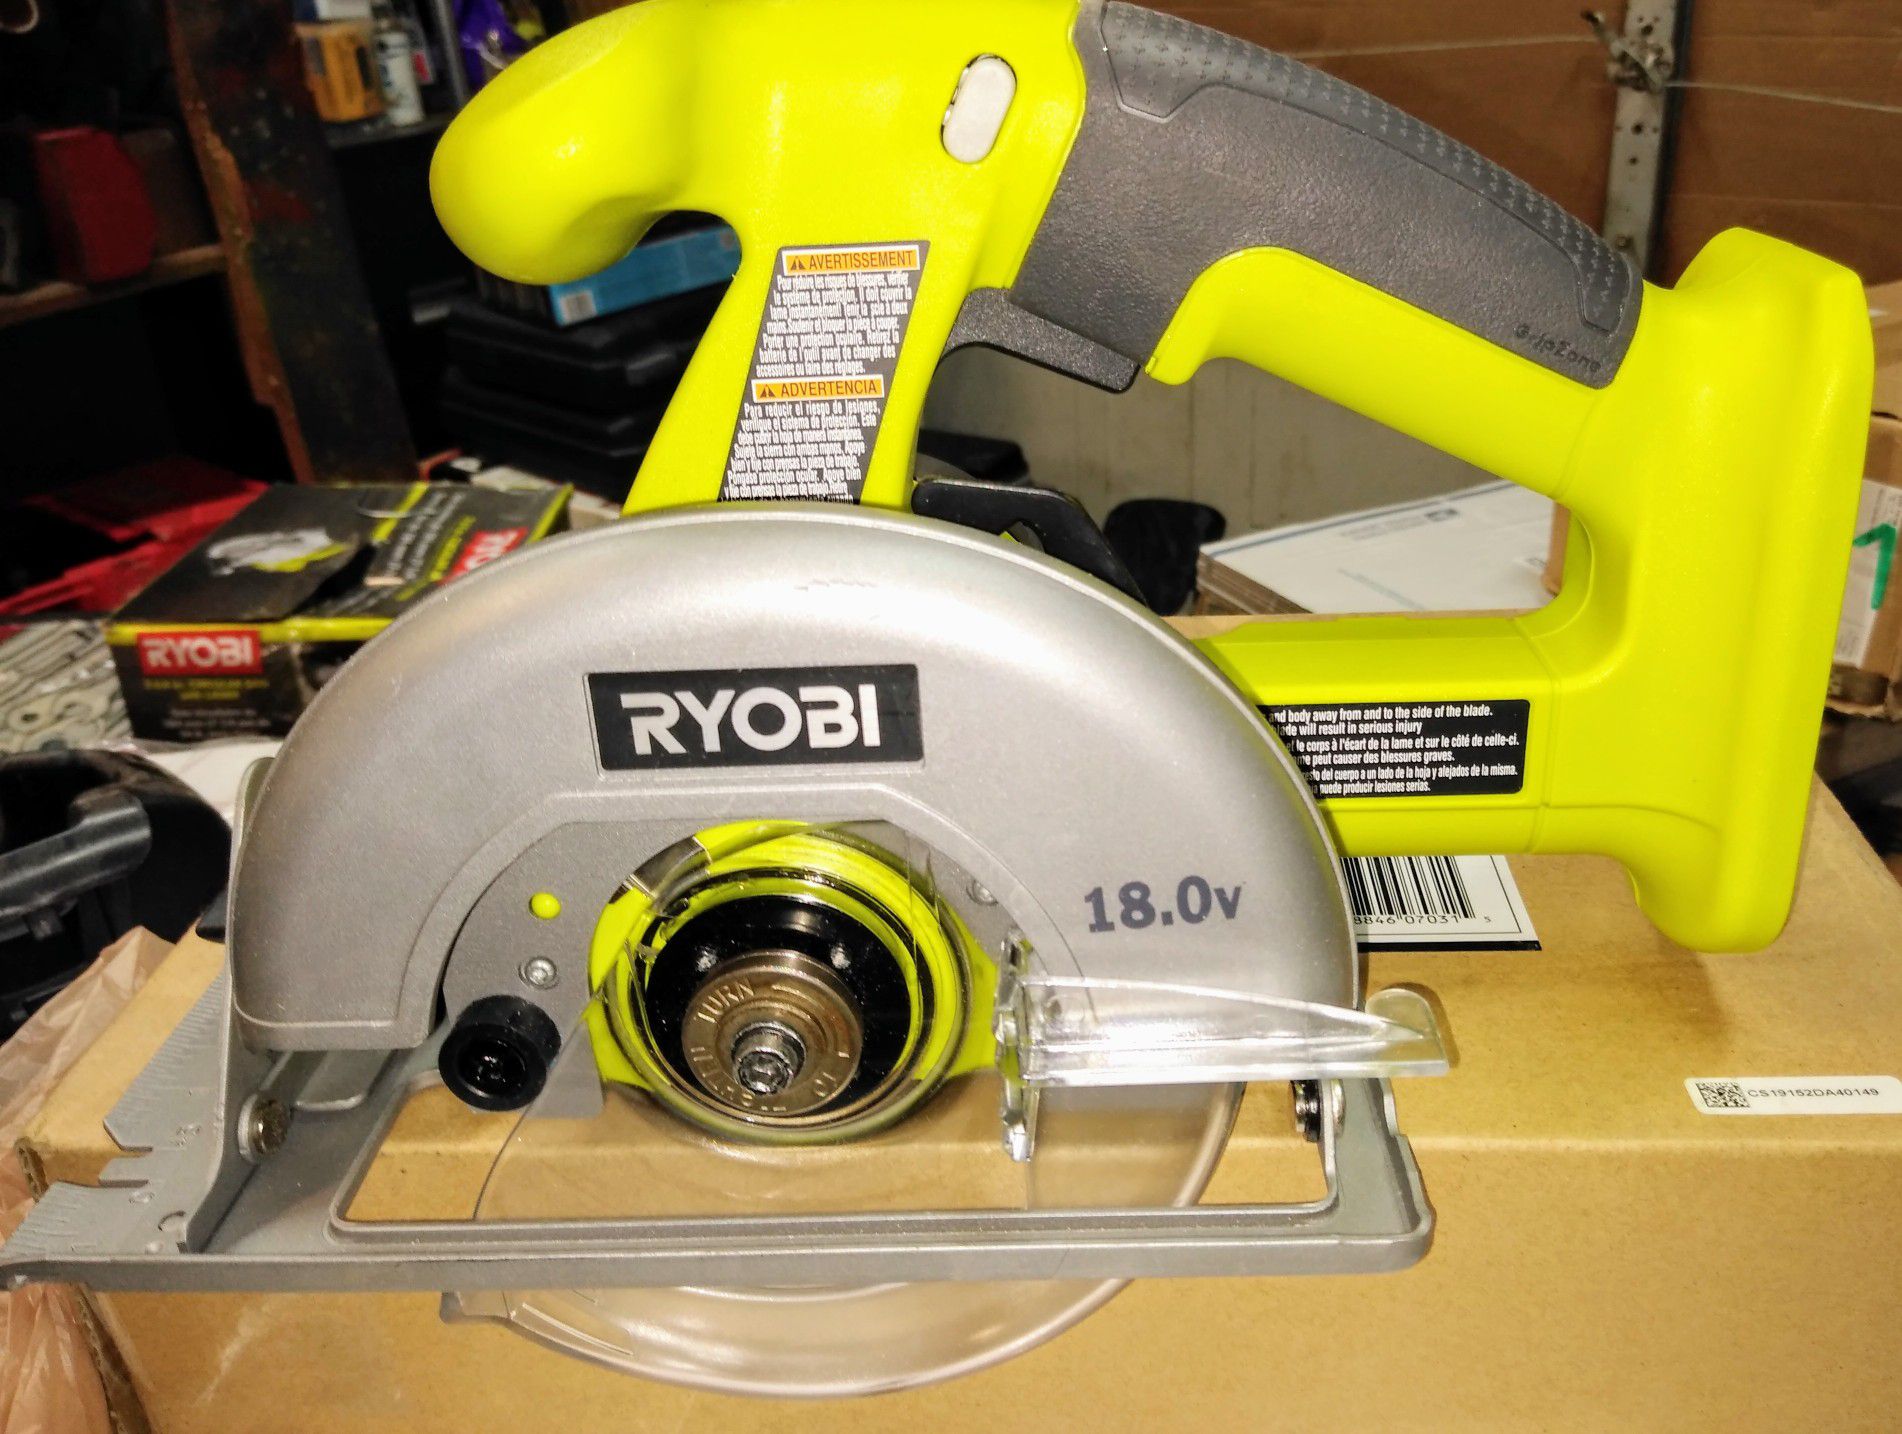 Ryobi One+ P501G 18V Lithium Ion Cordless 5 1/2 Inch Circular Saw (Battery Not included, Power Tool Only)